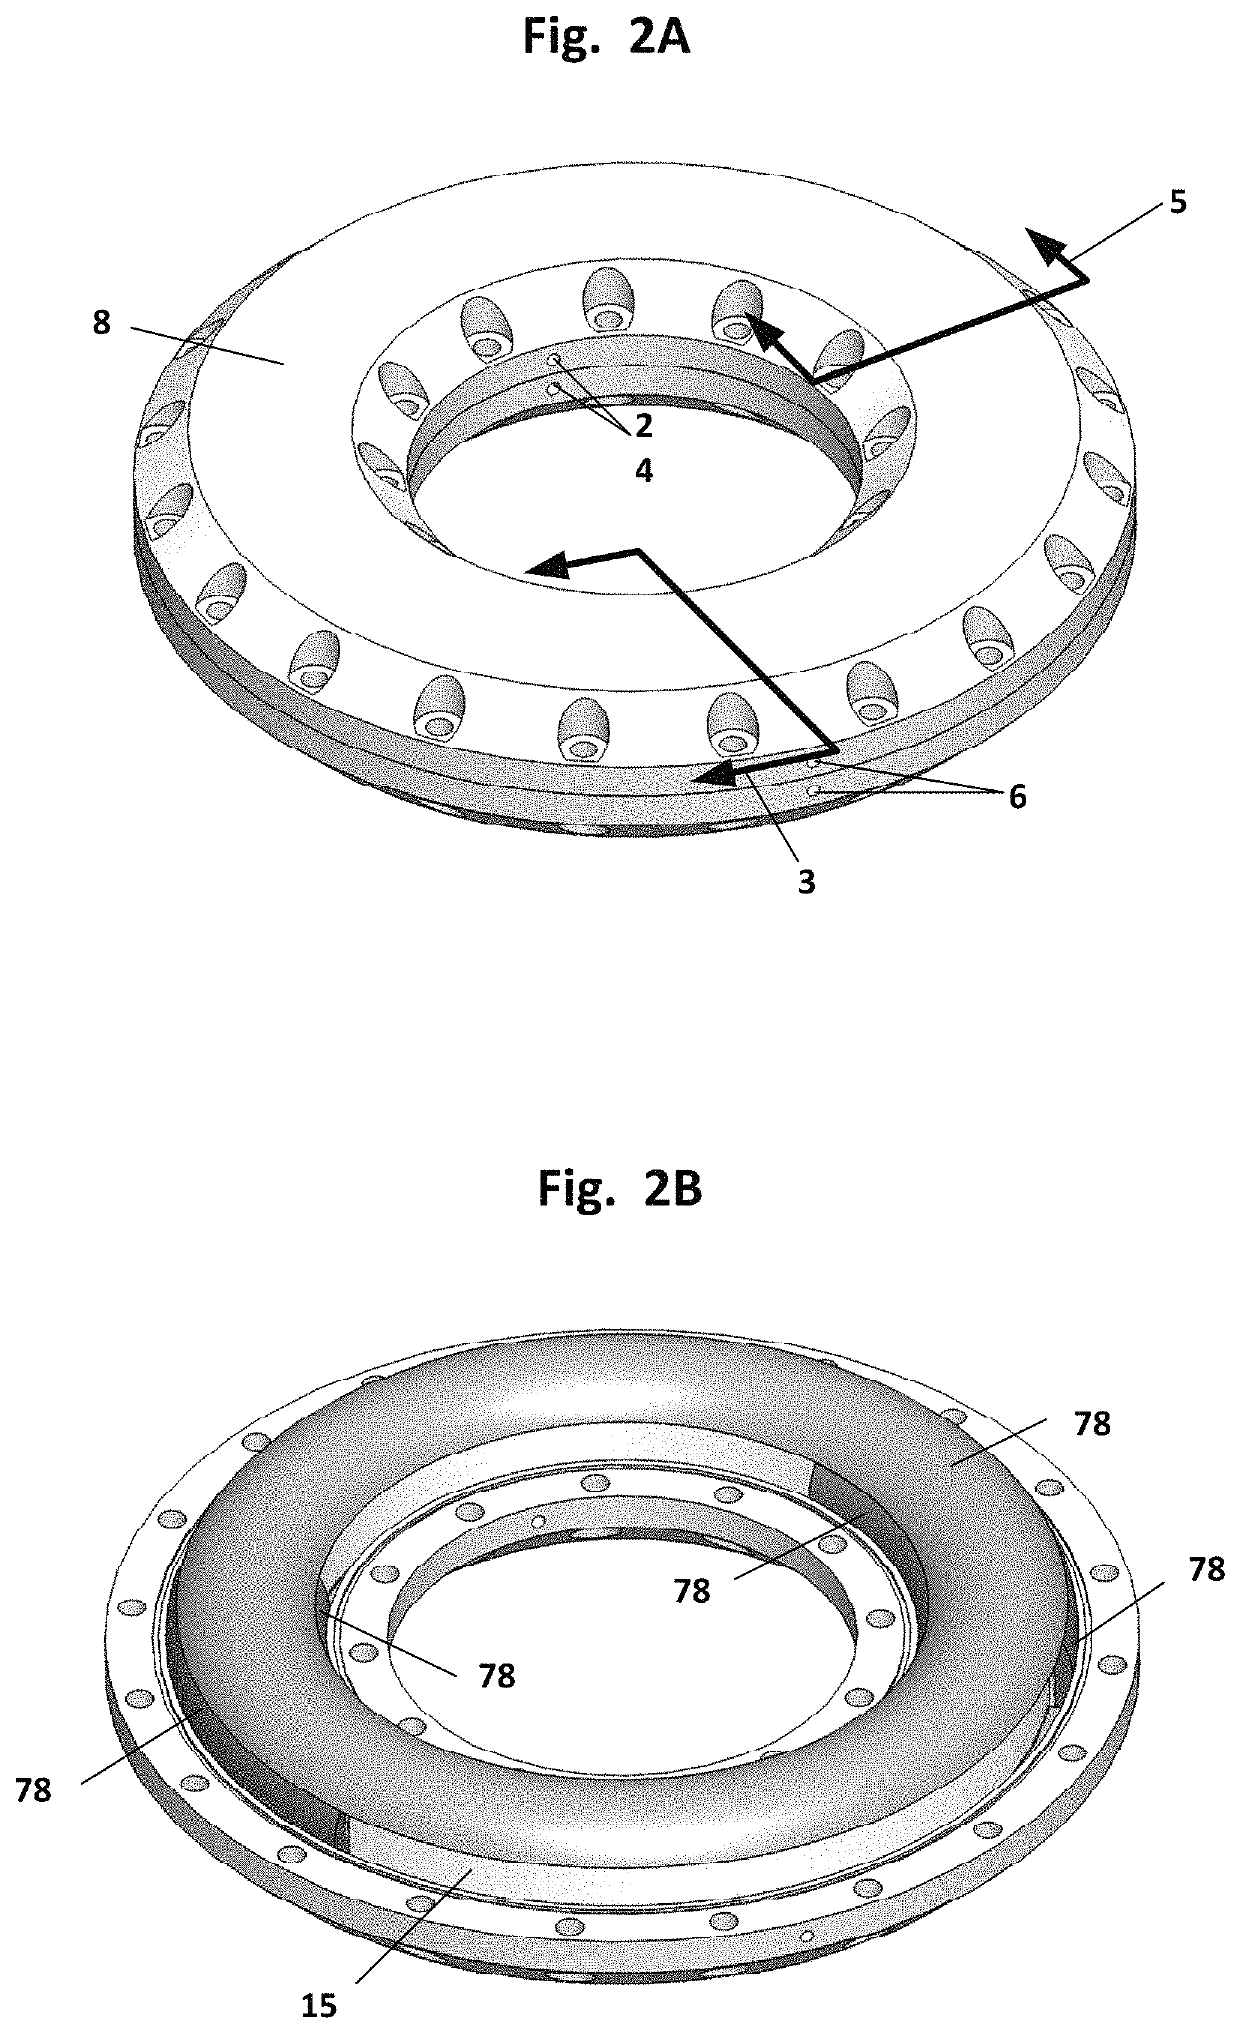 Rotary seal facilitating fluid flows through a rotating toroidal mass within a pressurized housing vessel